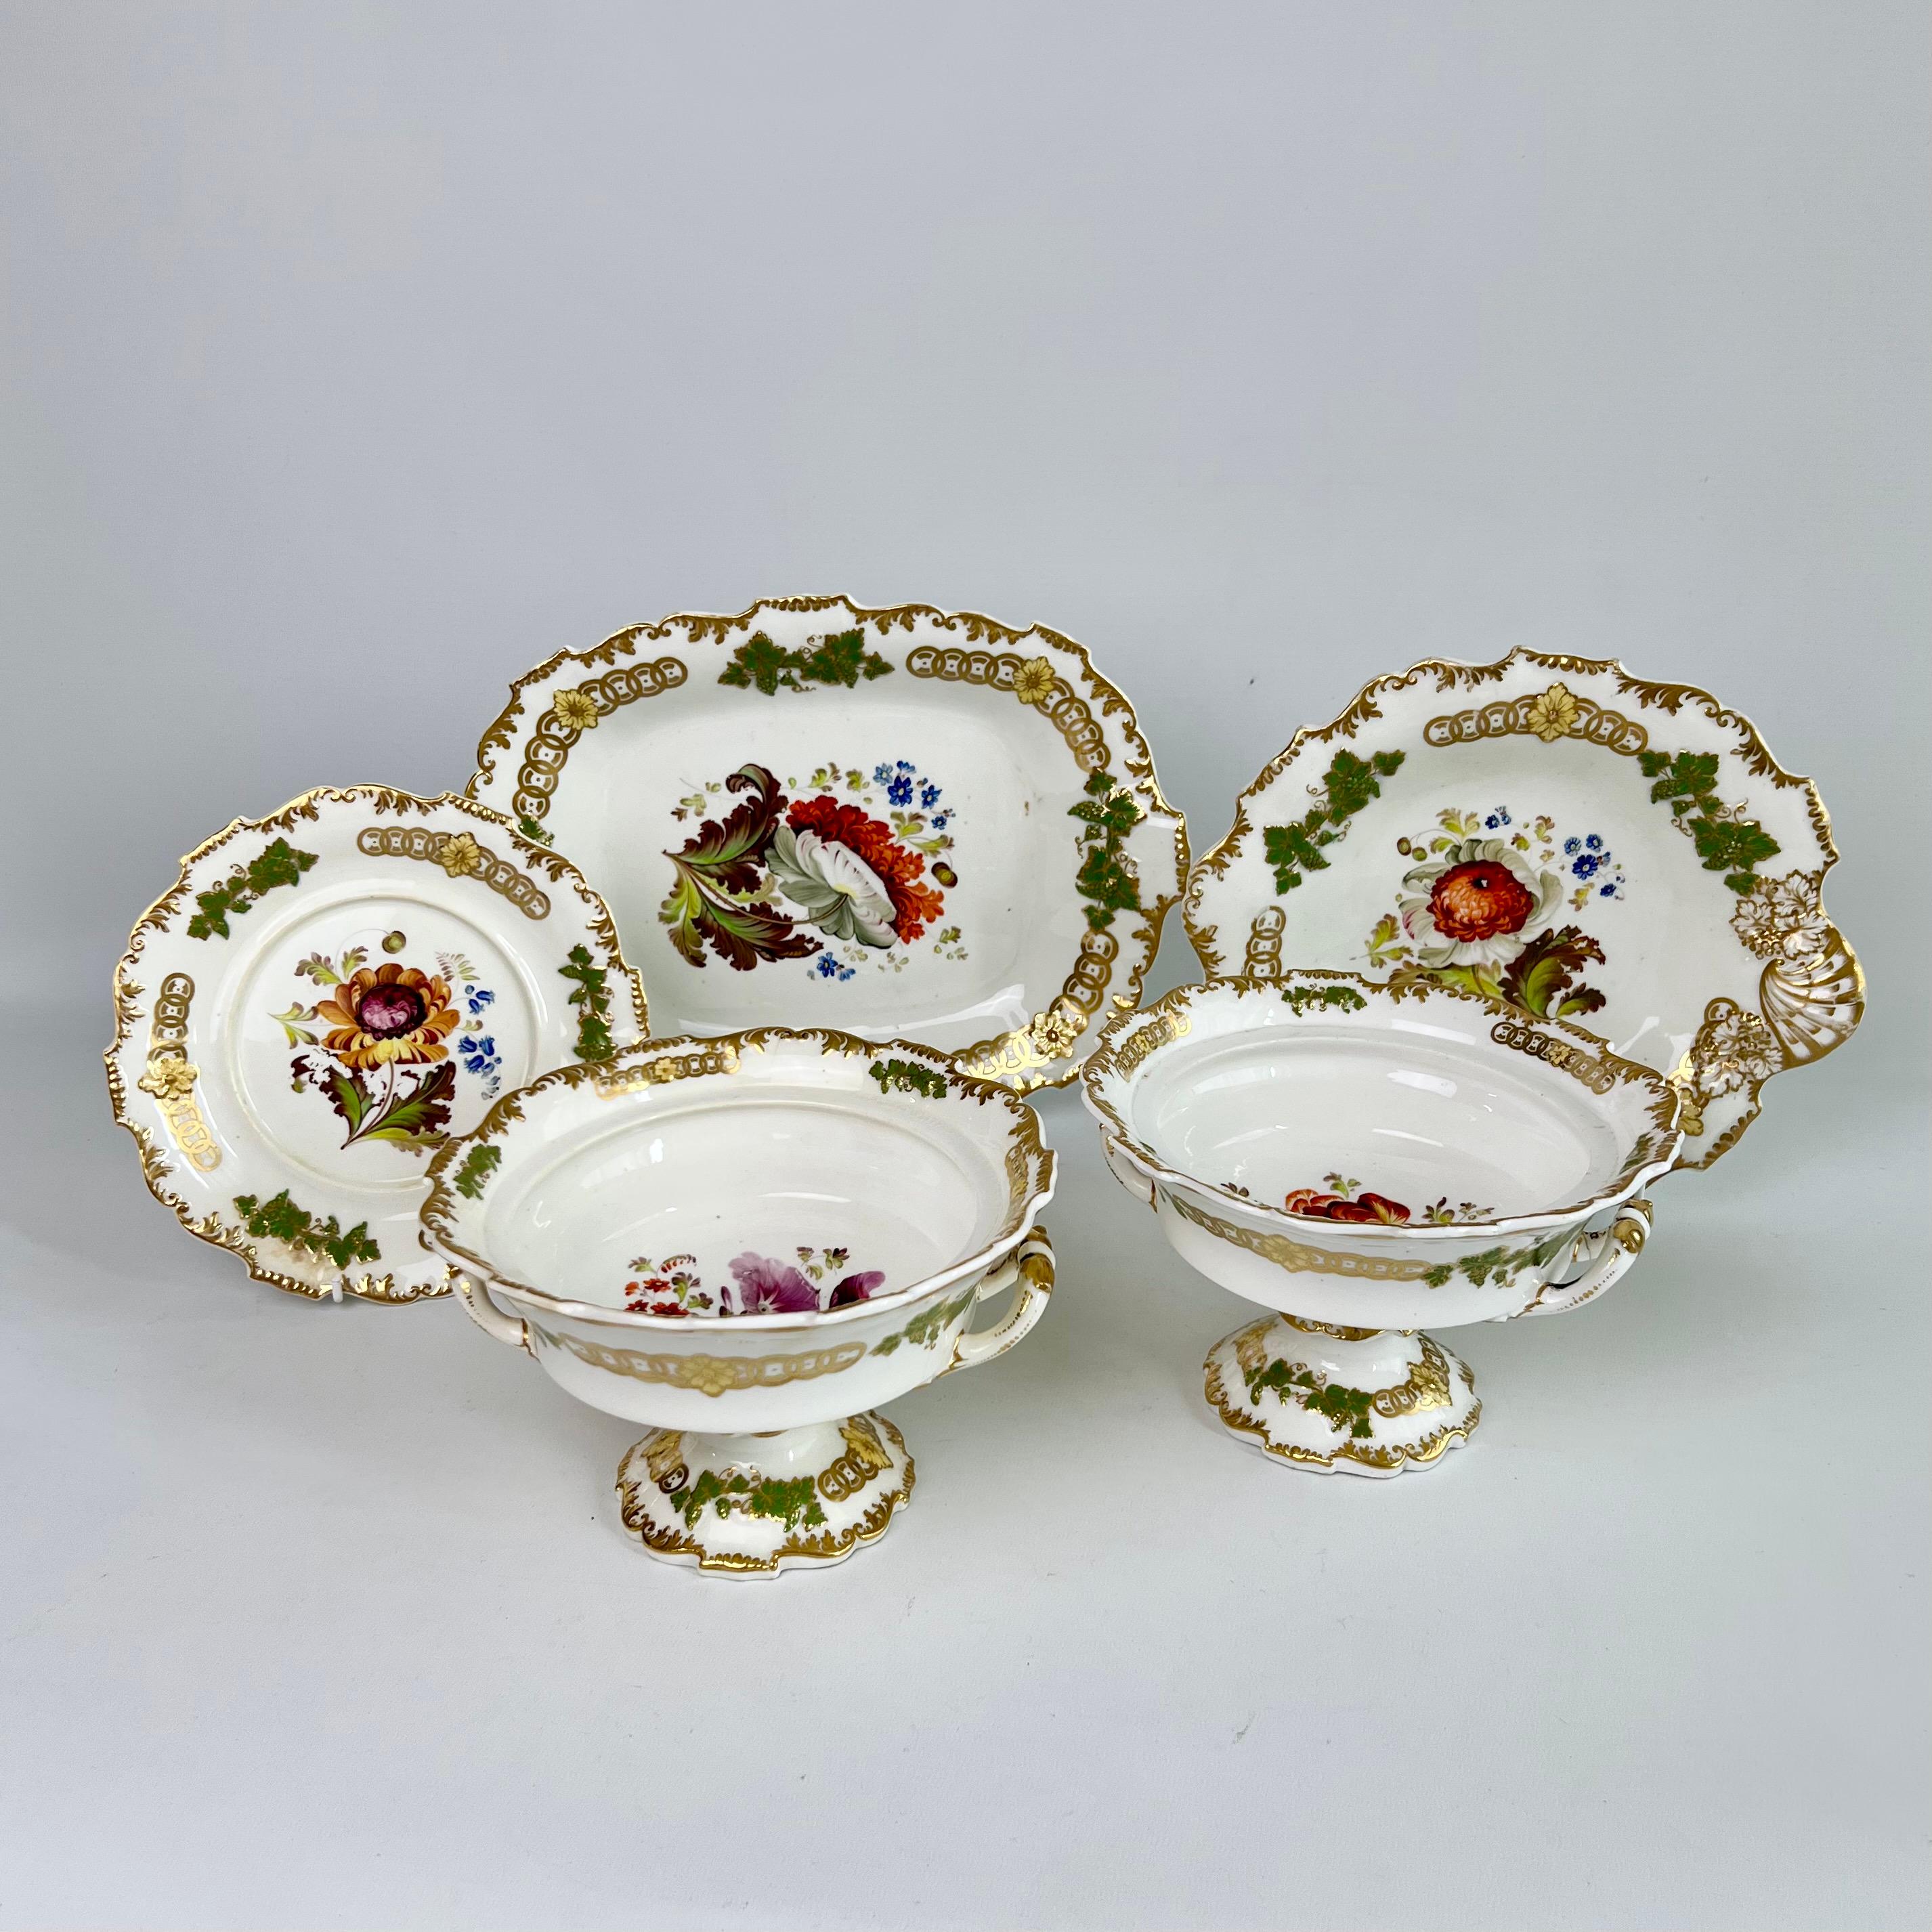 This is a charming tureen stand made by H&R Daniel in about 1827. It is made in the popular Shrewsbury shape and has a beautiful yellow ranunculus in the centre. This plate would have been the stand for a sauce tureen belonging to a dessert